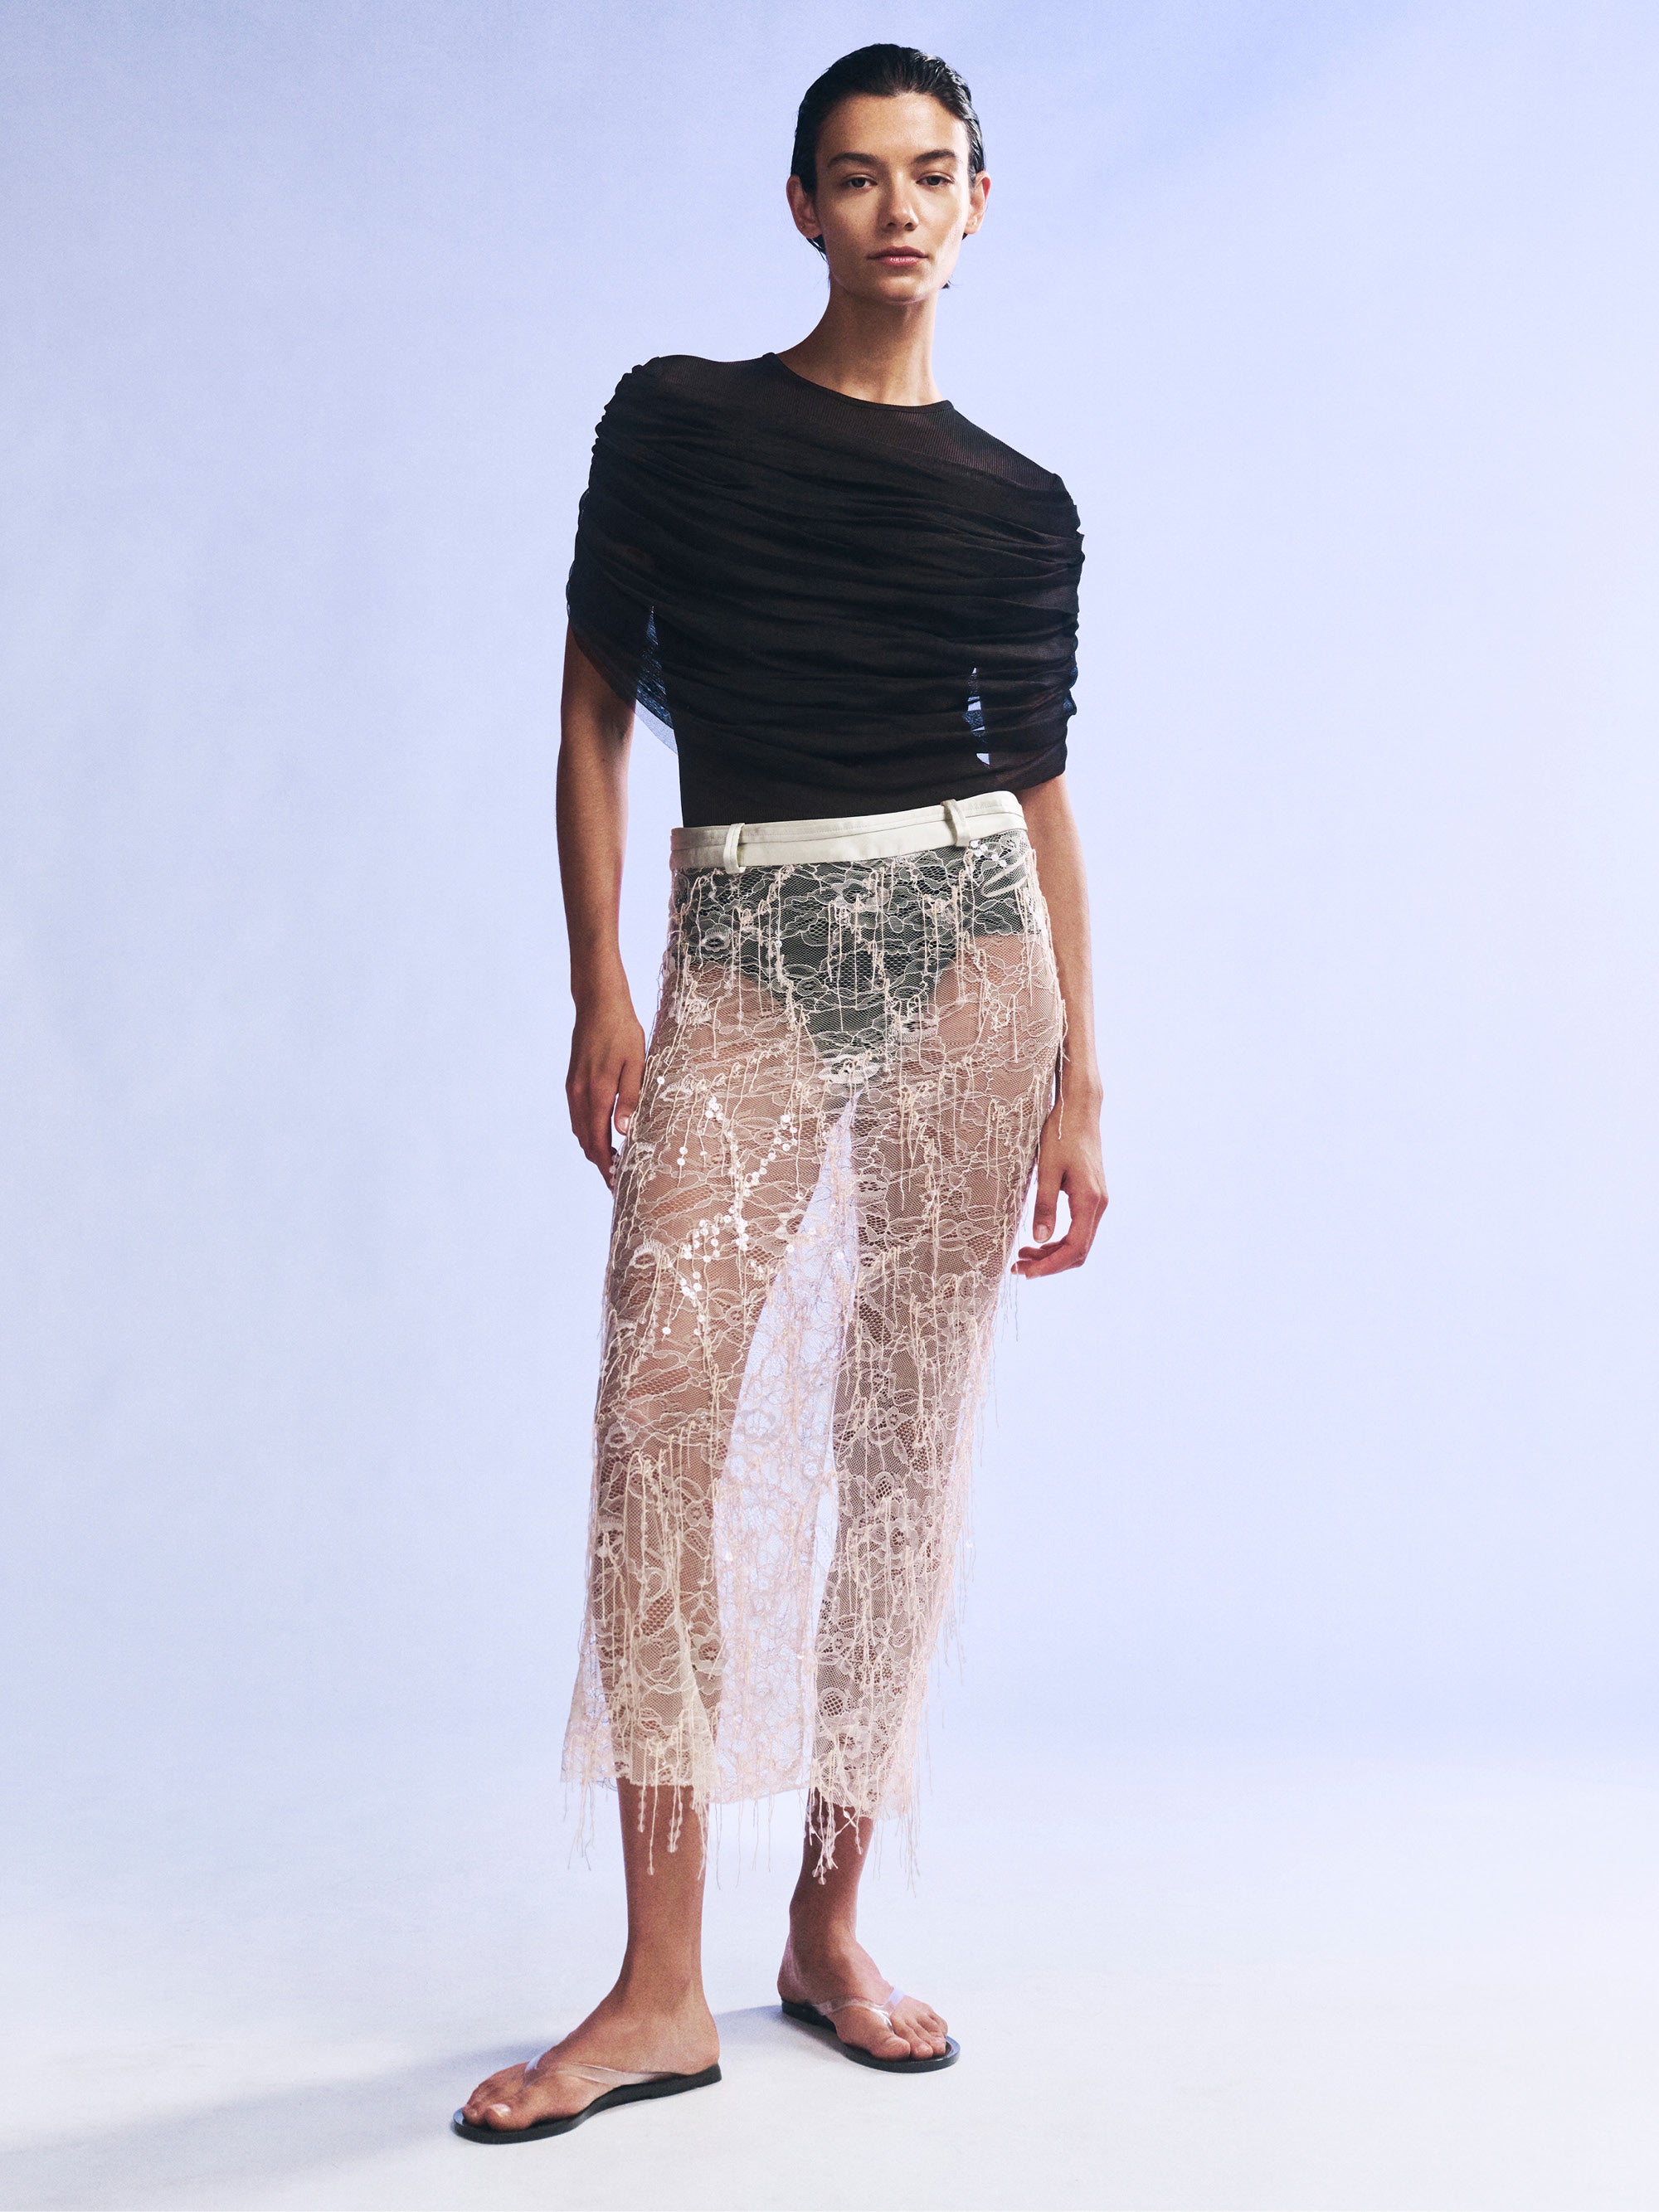 Beaded Ivy Lace Skirt